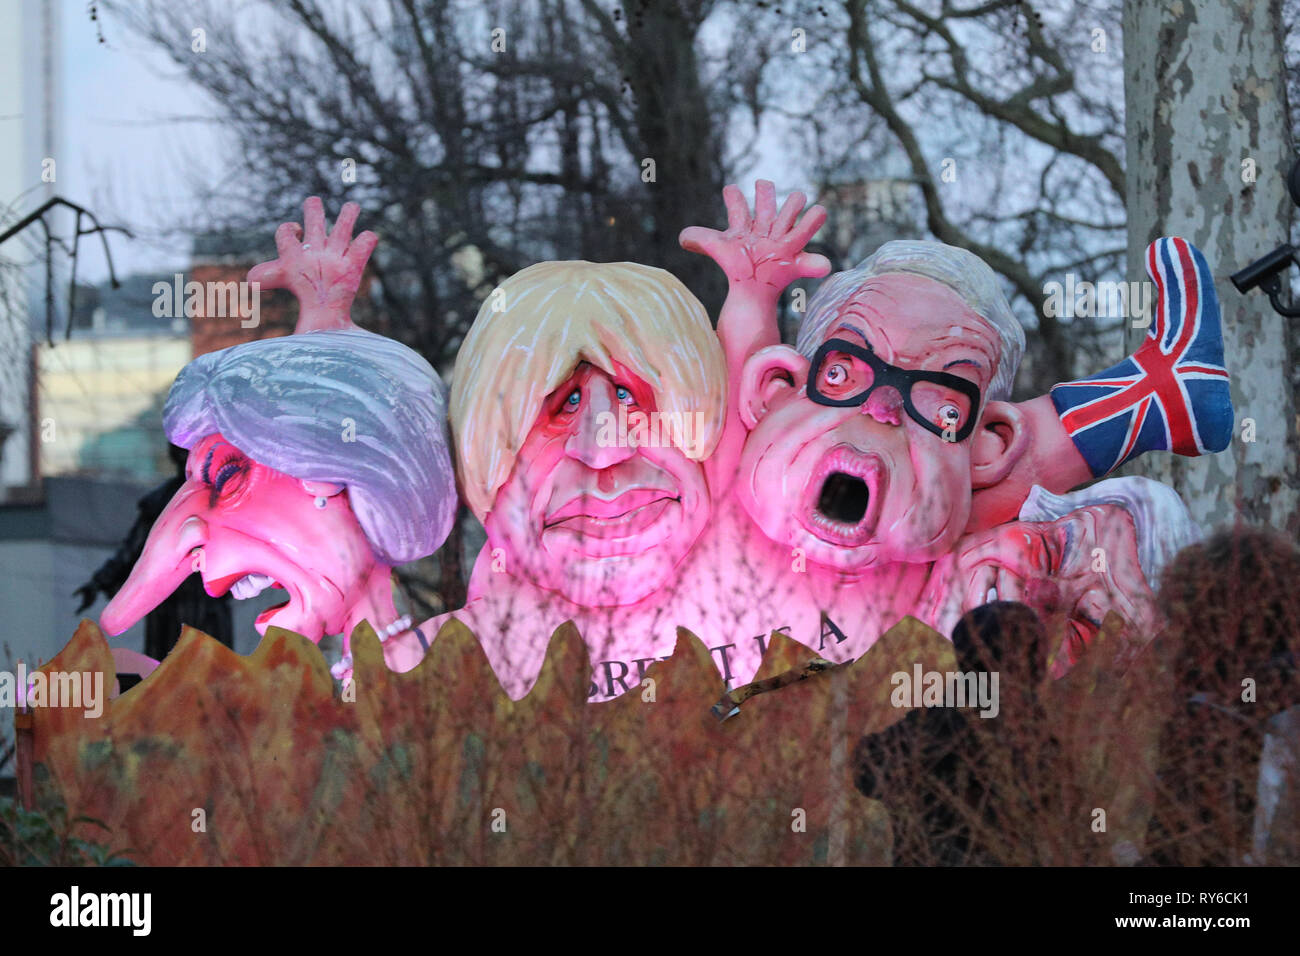 Westminster, London, UK. 12th Mar, 2019. Pro Brexit and Anti Brexit supporters protest outside the Houses of Parliament in Westminster today, on the day that has a 'meaningful vote' in Parliament on Theresa May's Brexit Deal scheduled for the evening. Credit: Imageplotter/Alamy Live News Stock Photo